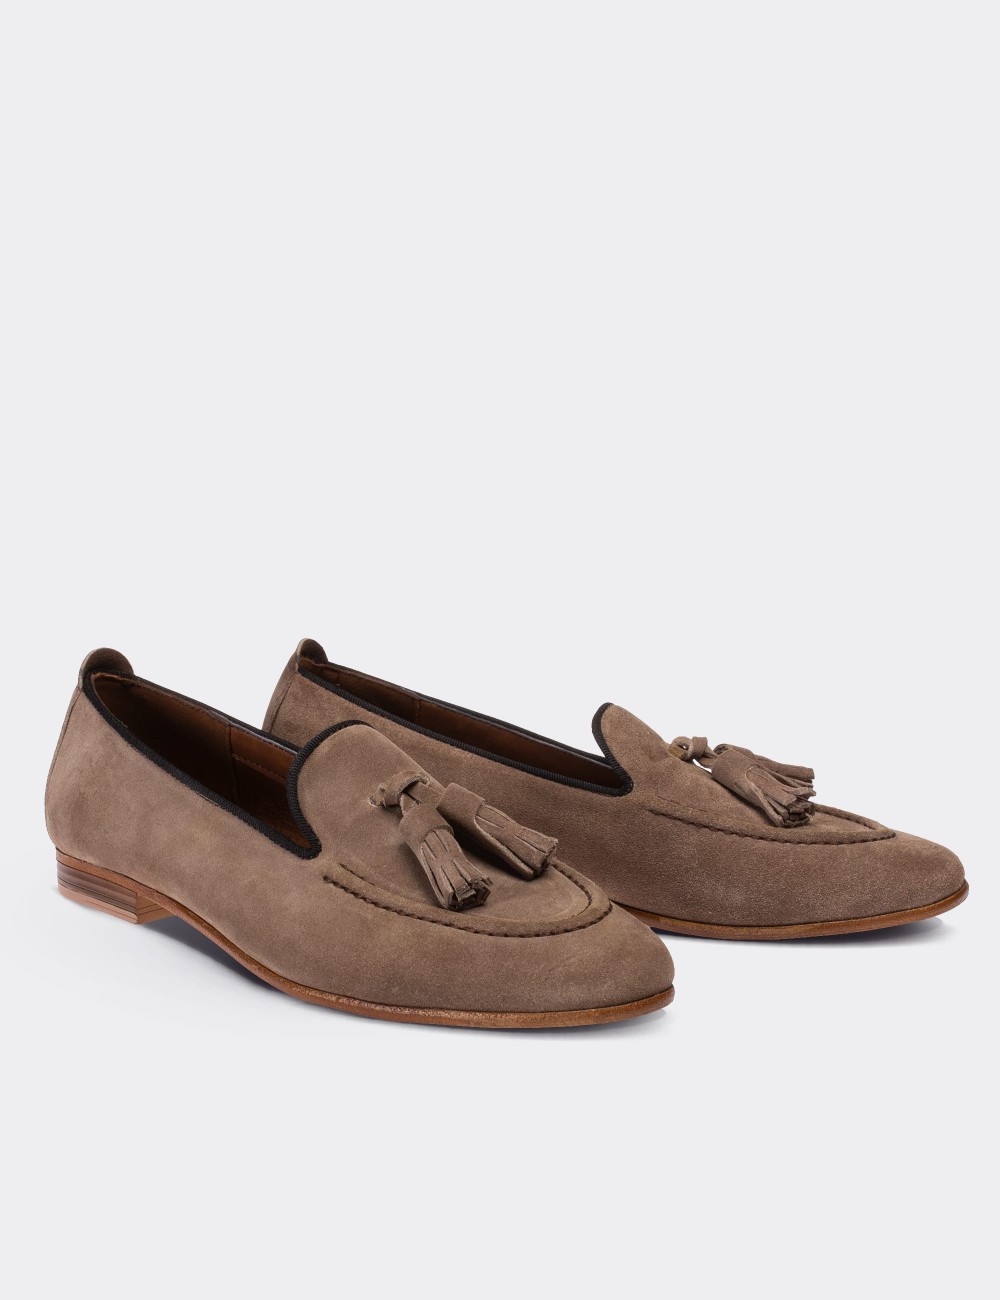 Sandstone Suede Leather Loafers - 01619ZVZNM01